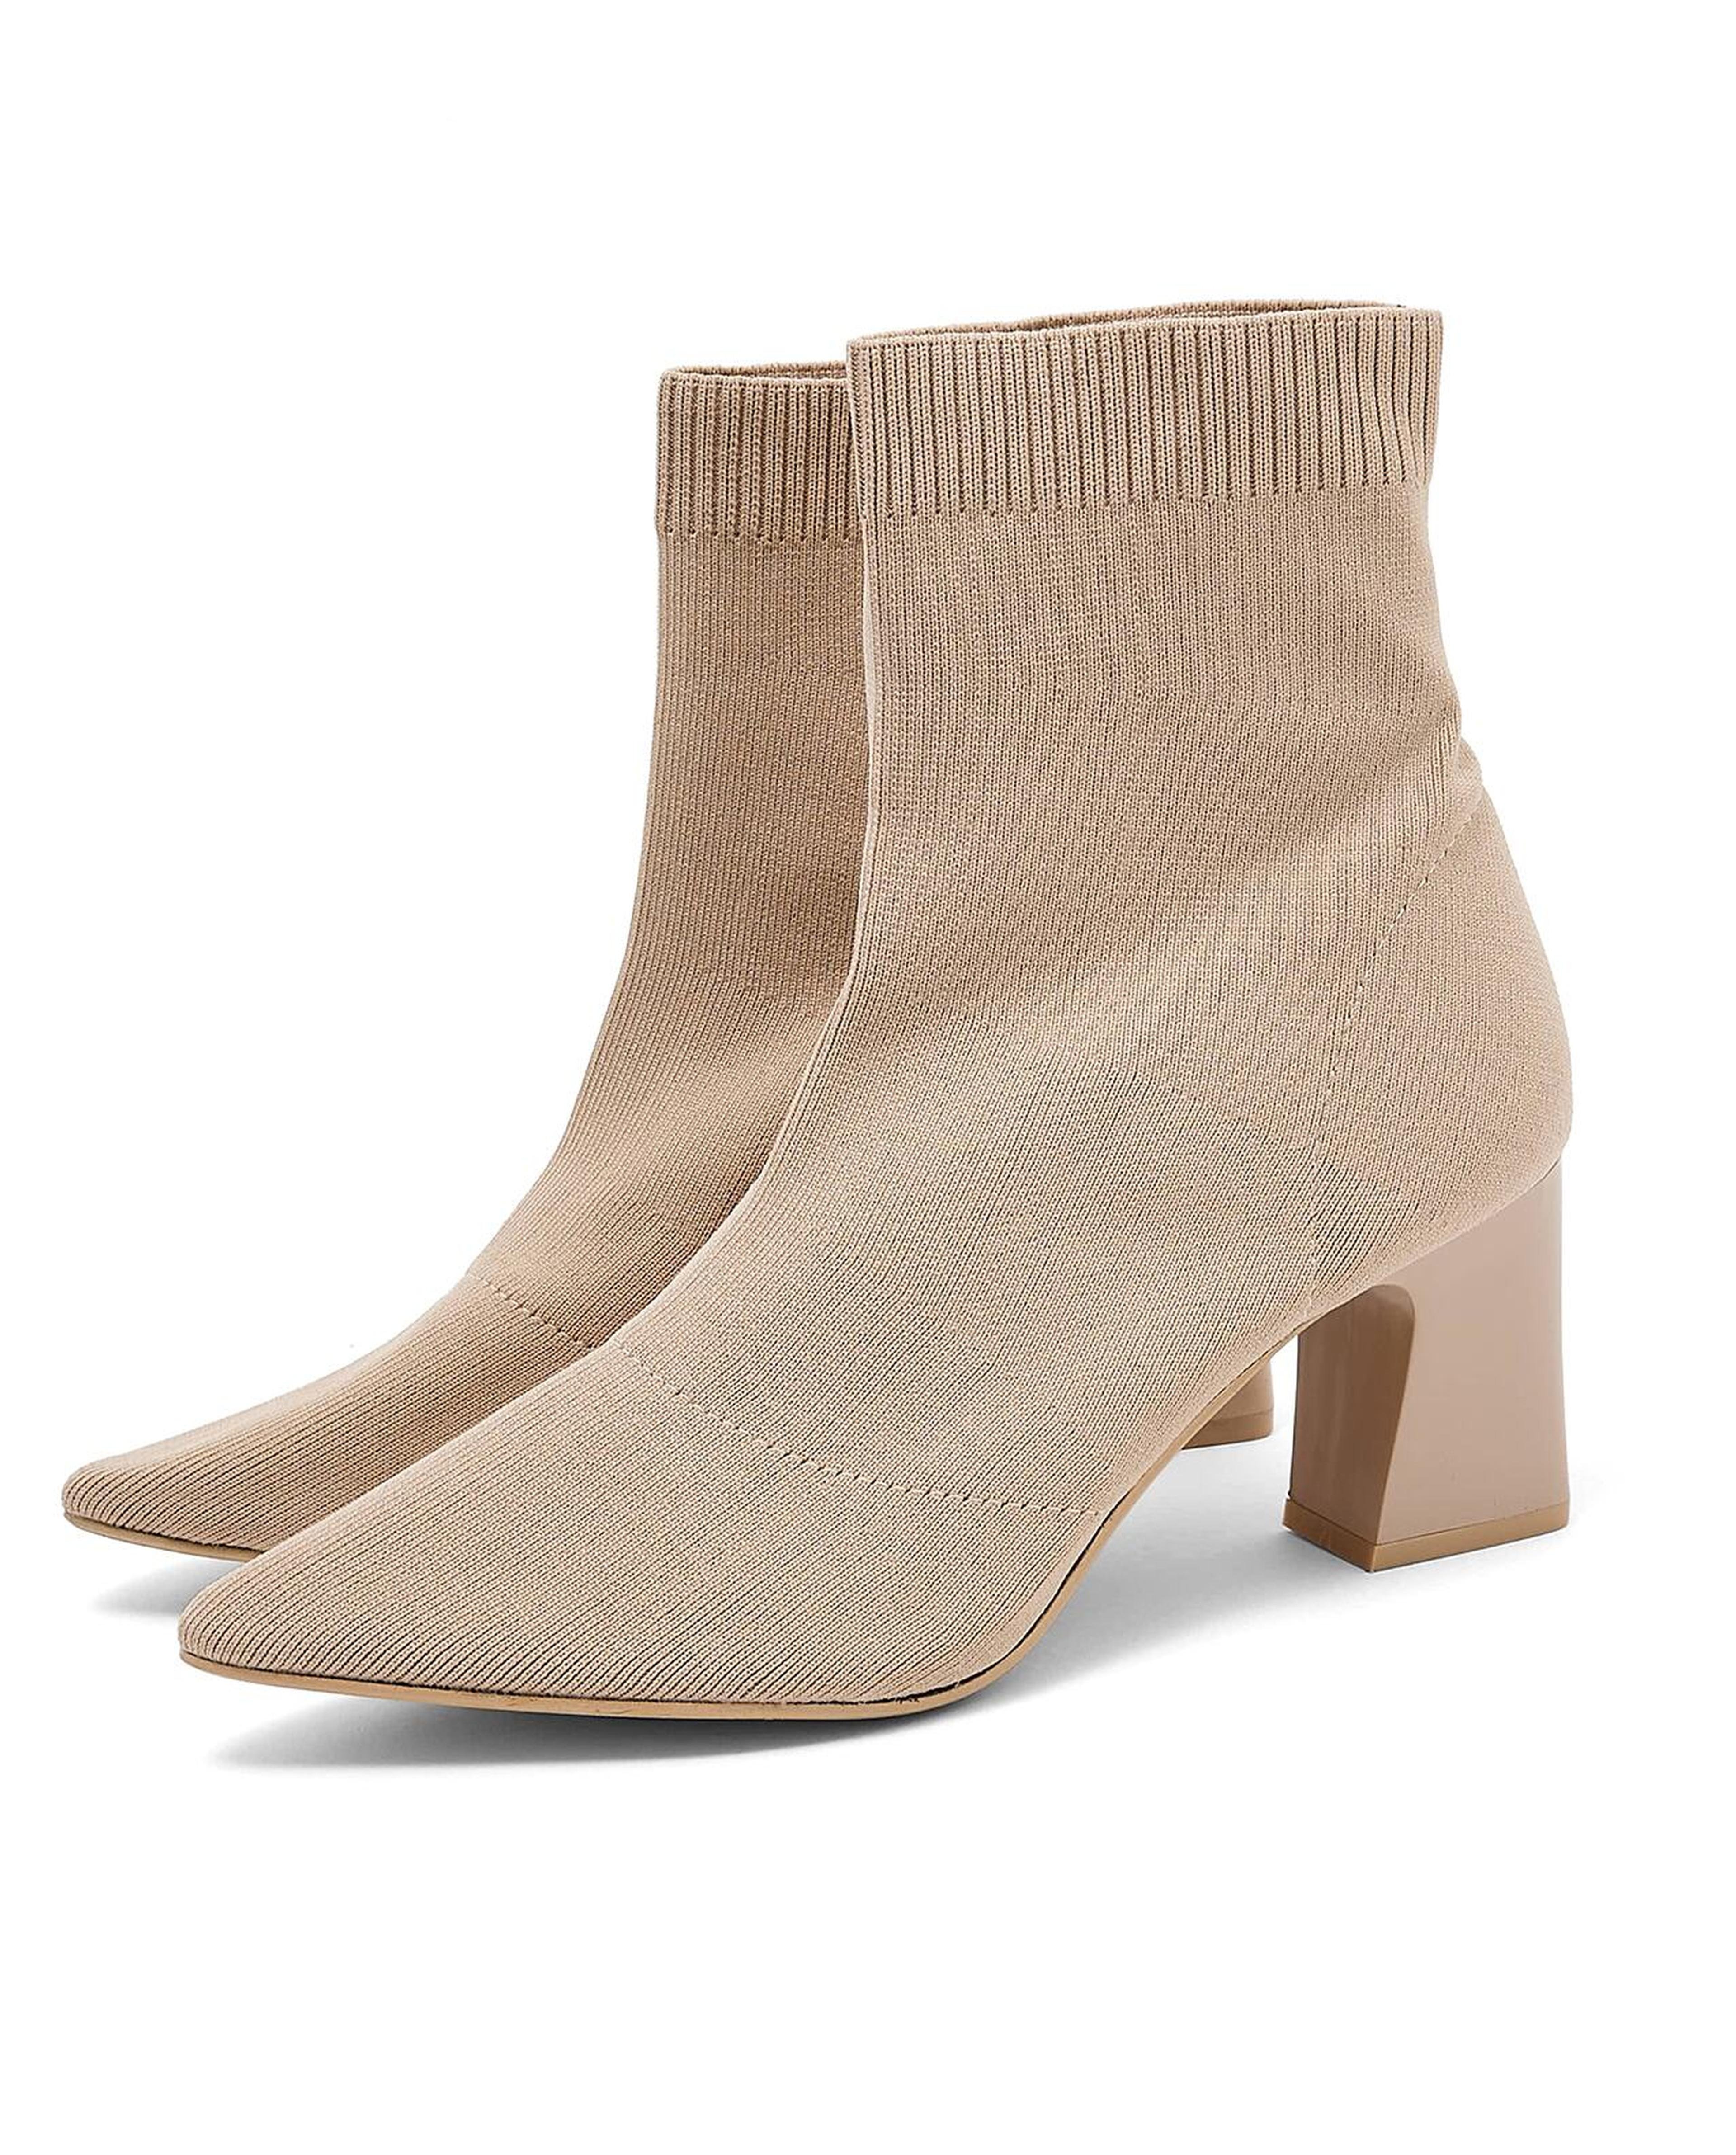 Solid Block Heel Ankle Boots